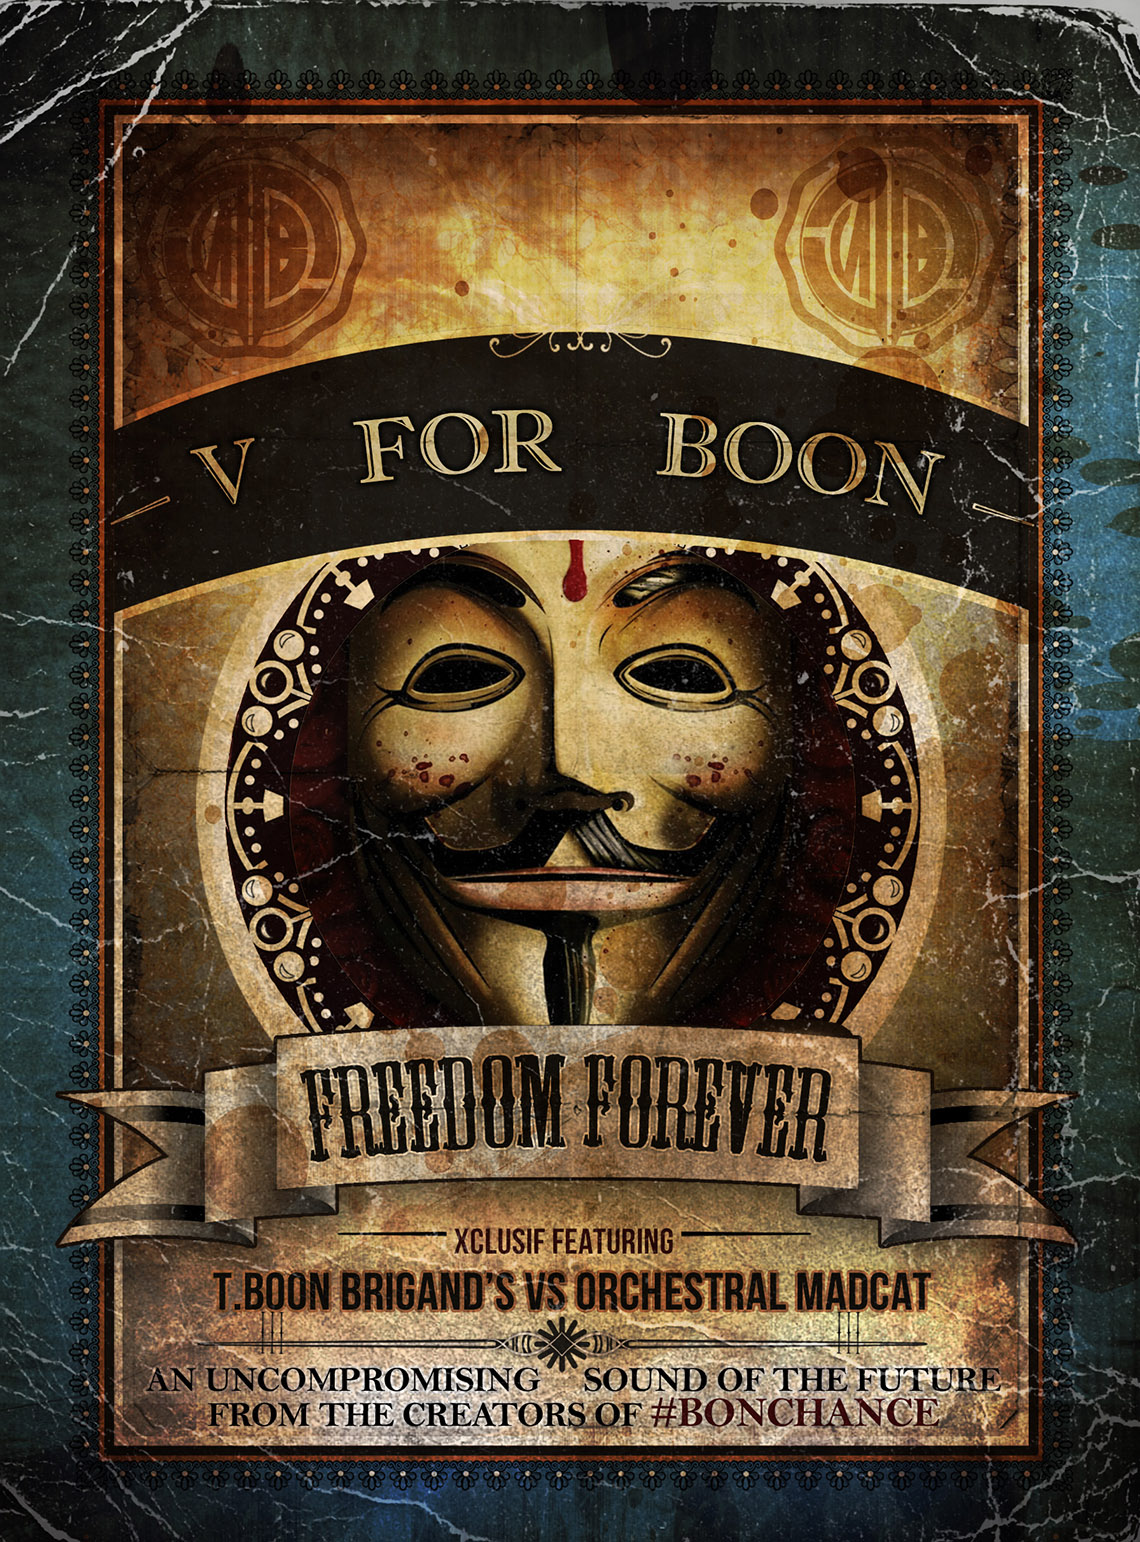 Affiche Officielle V For Boon by T.Boon